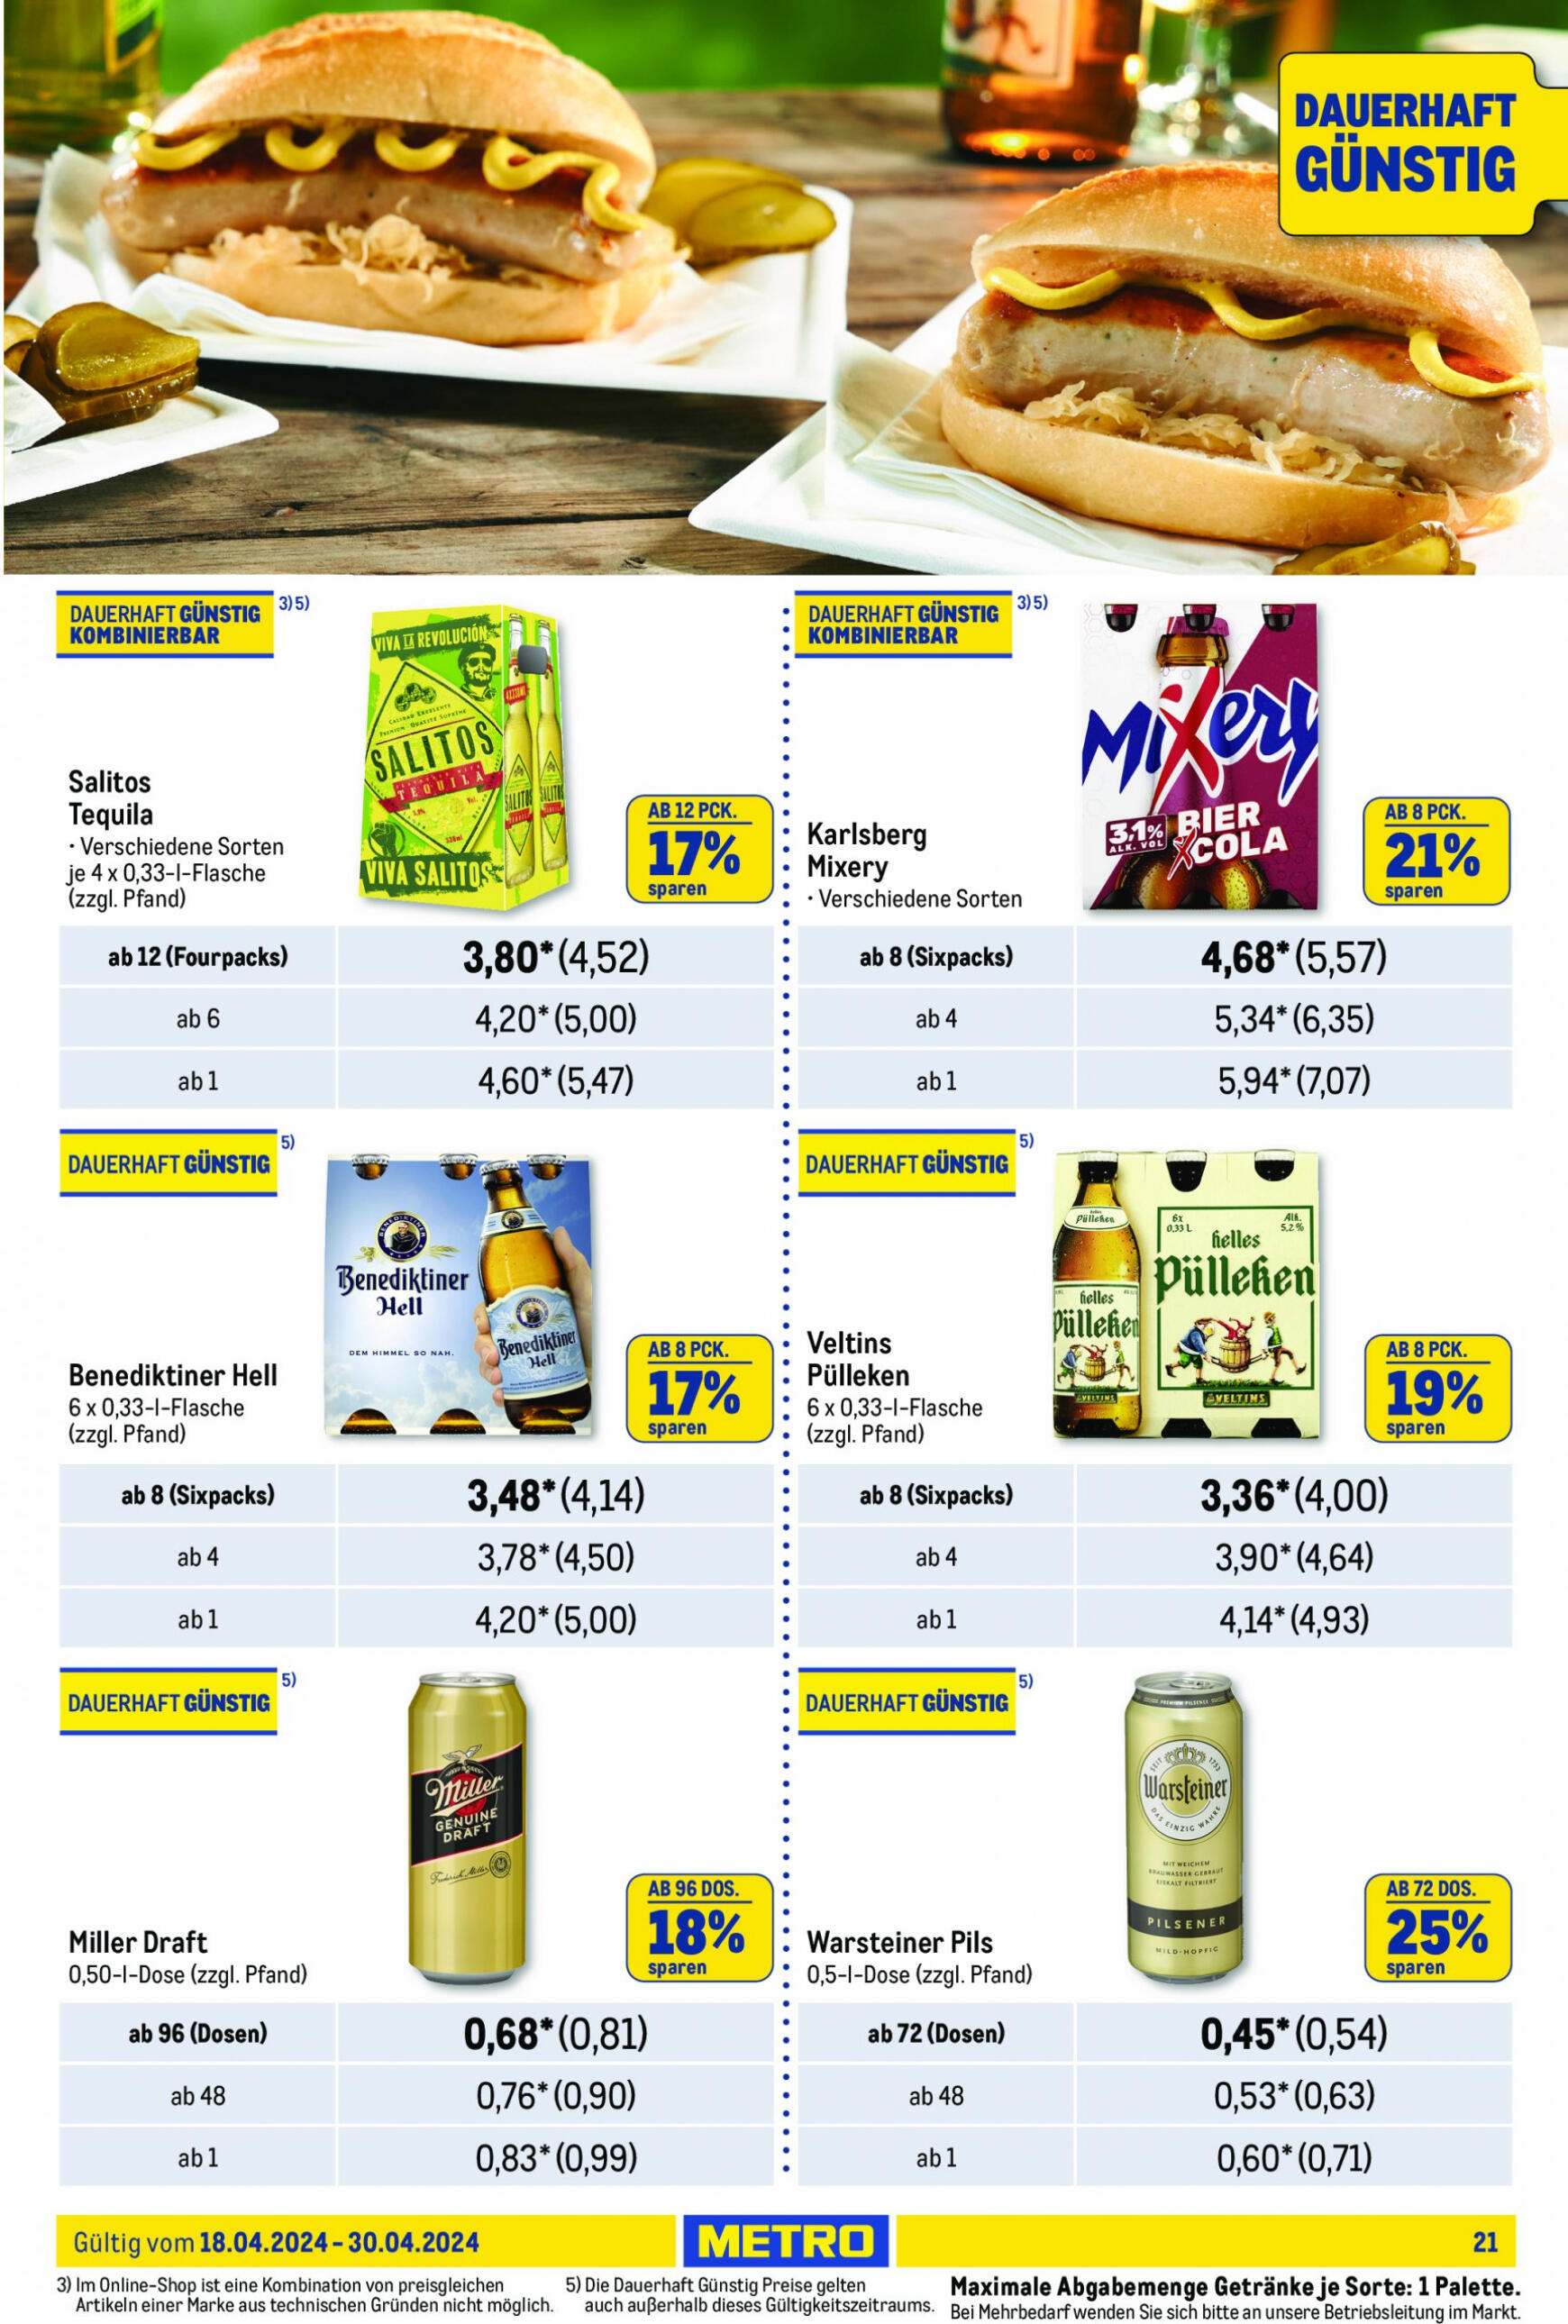 metro - Flyer Metro - Food-NonFood aktuell 18.04. - 30.04. - page: 21